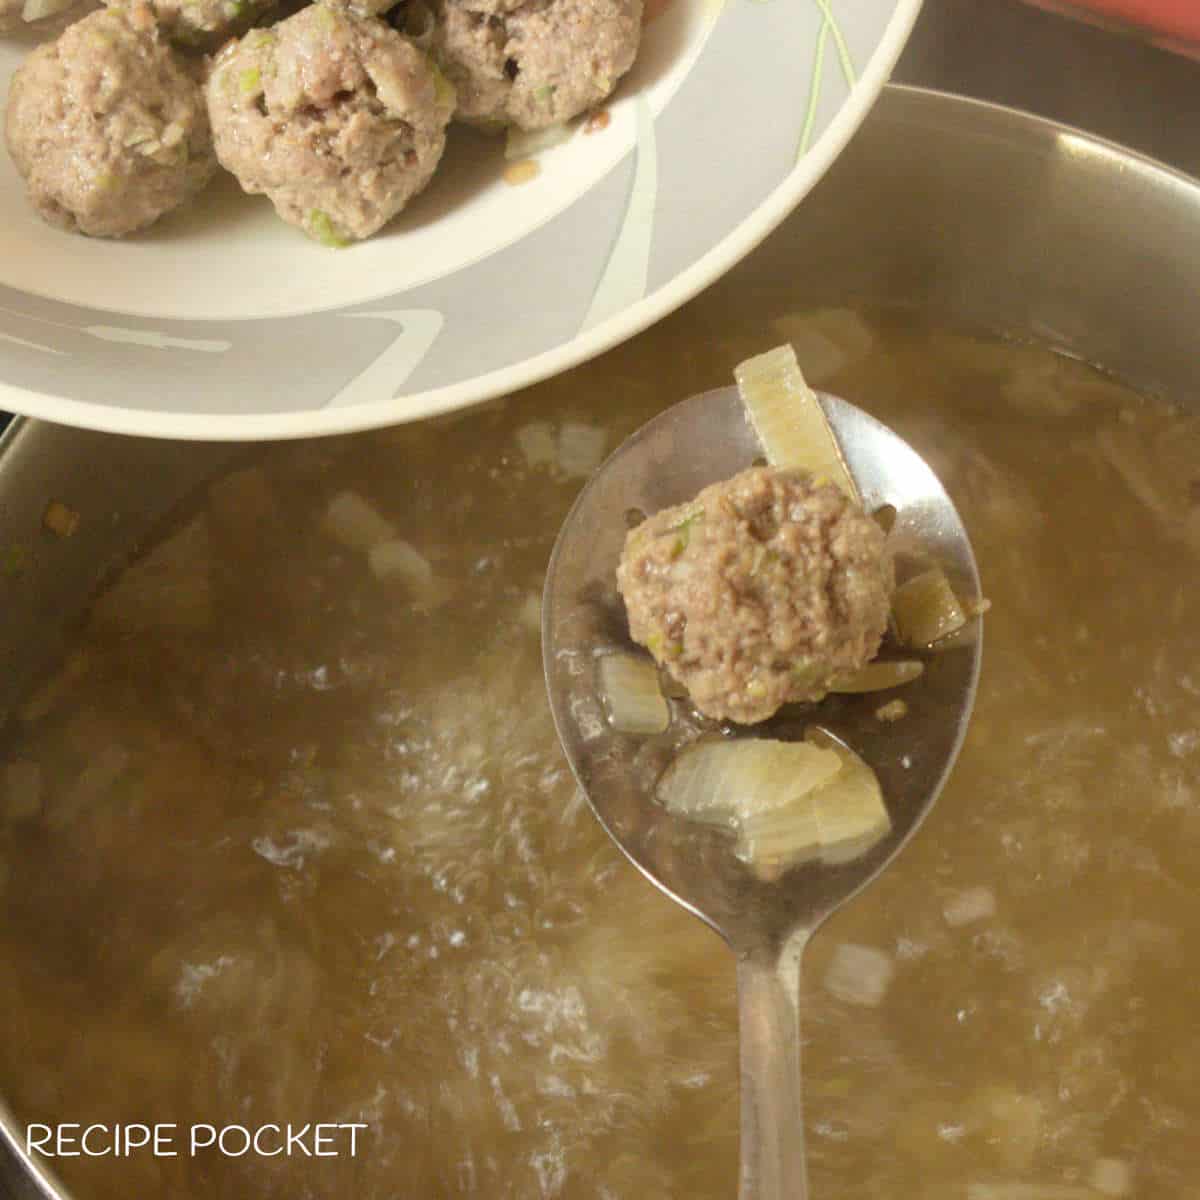 Meatballs being removed from hot soup.